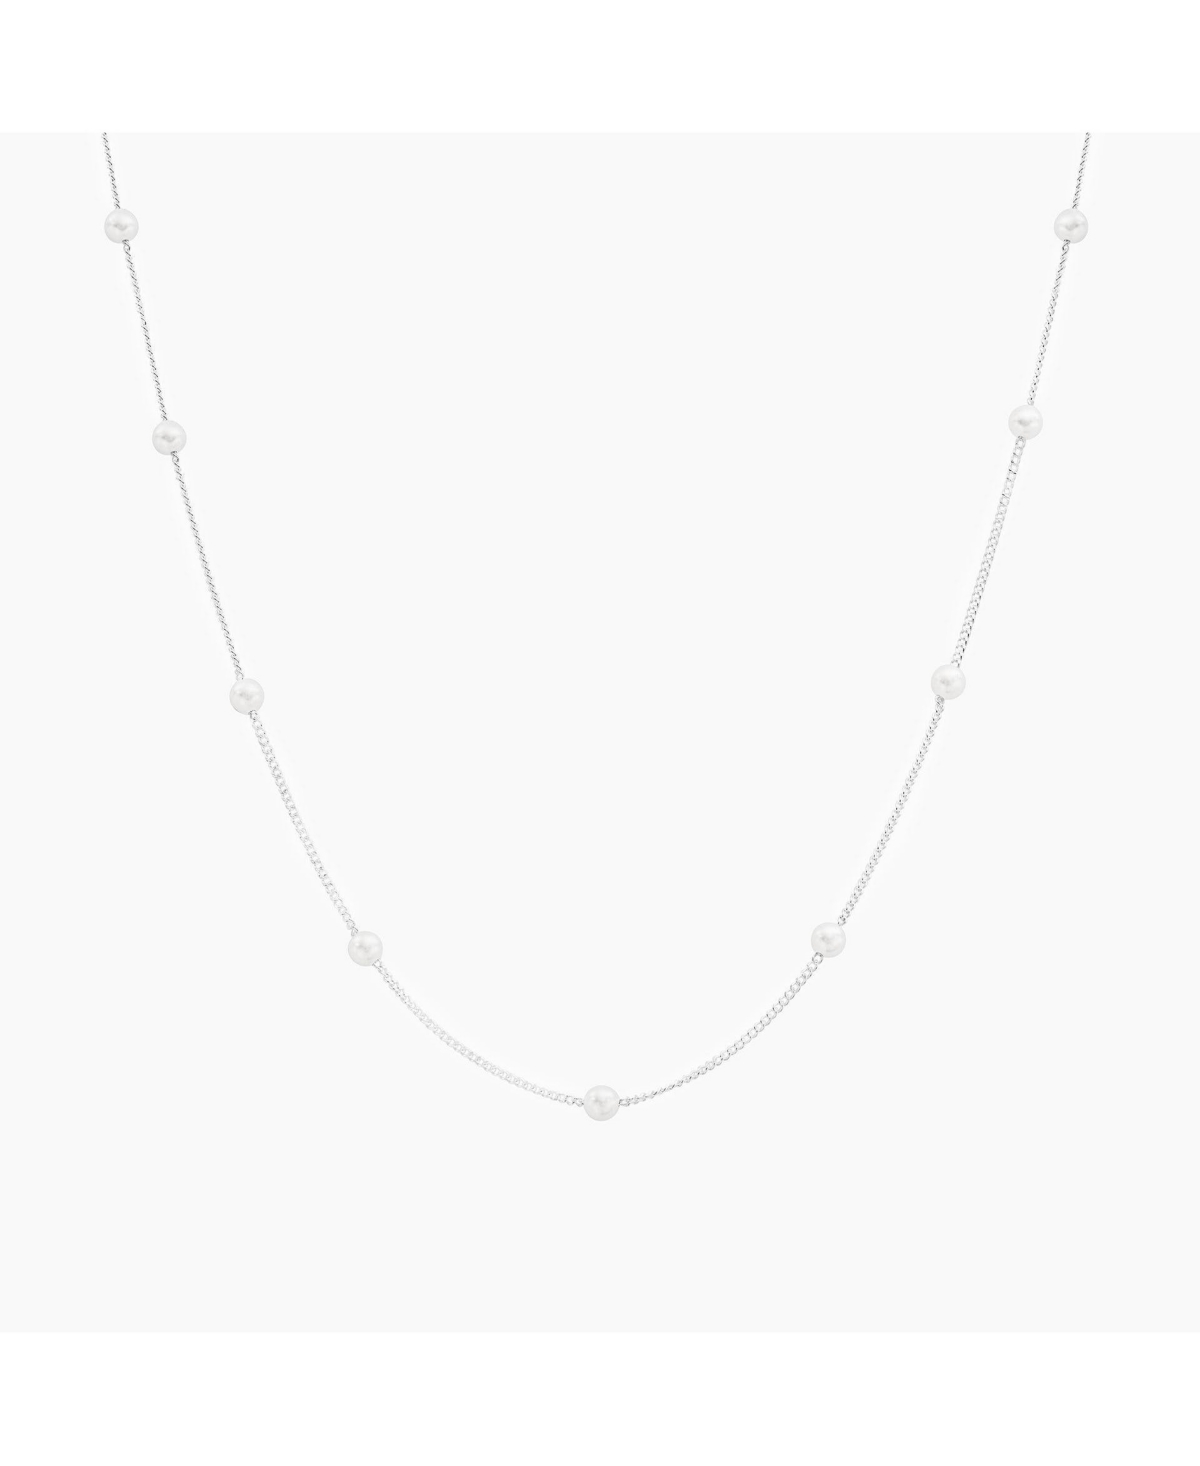 Infinite Cultured Pearl Necklace - White gold